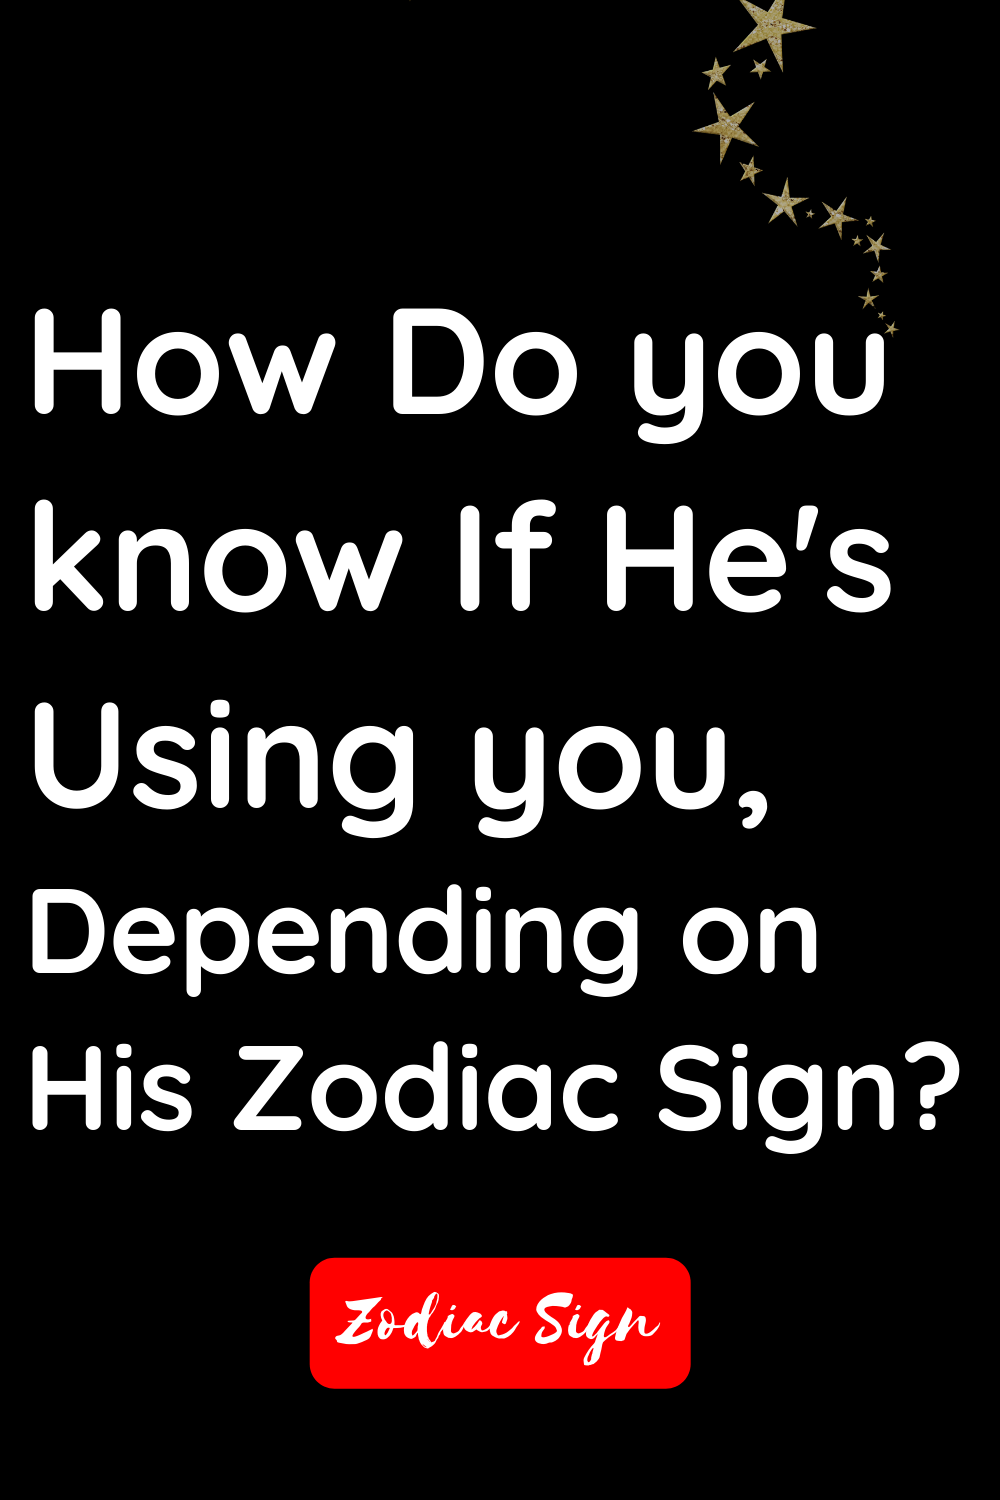 How do you know if he's using you, depending on his zodiac sign?